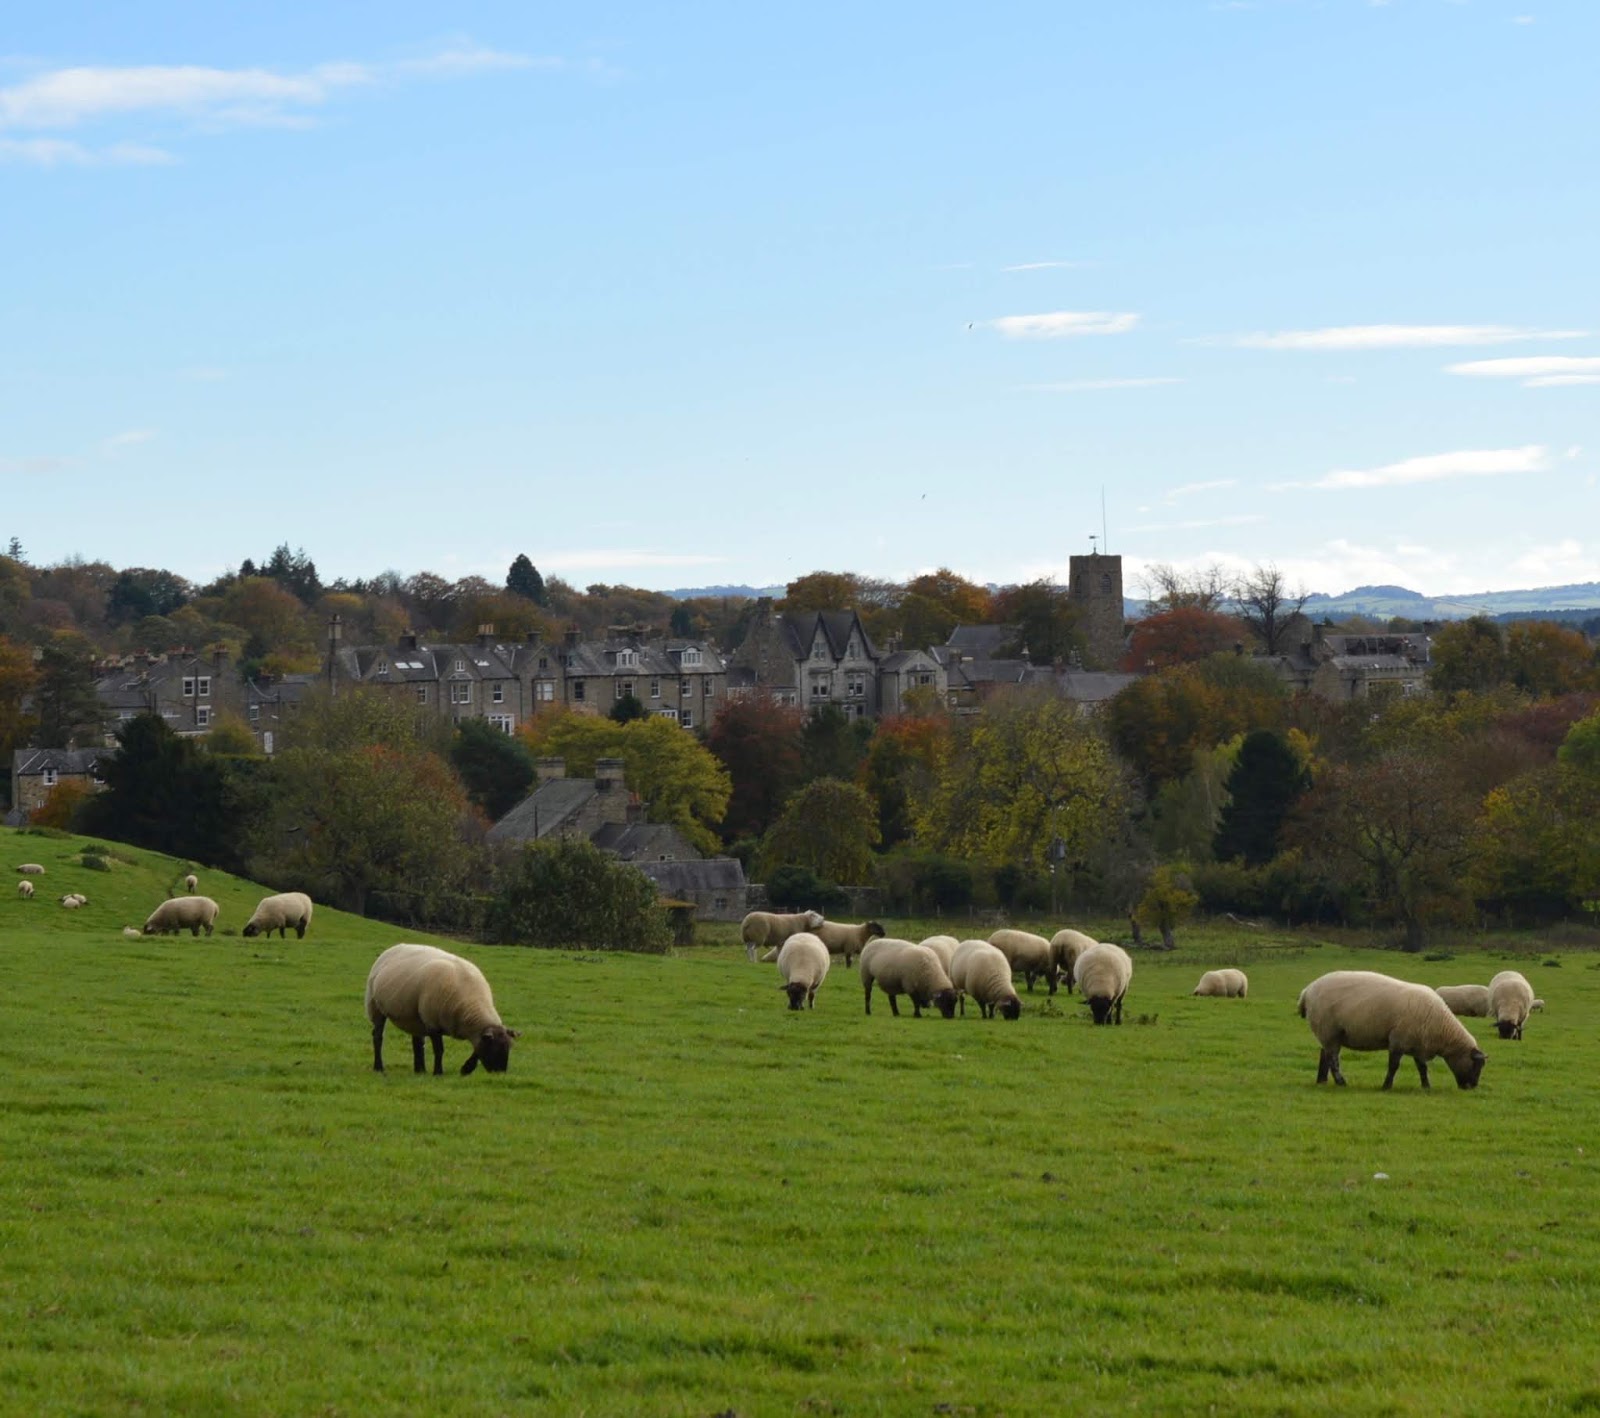 A lovely pub lunch & a trip to Corbridge Roman Town with kids  - sheep and view of corbridge new town